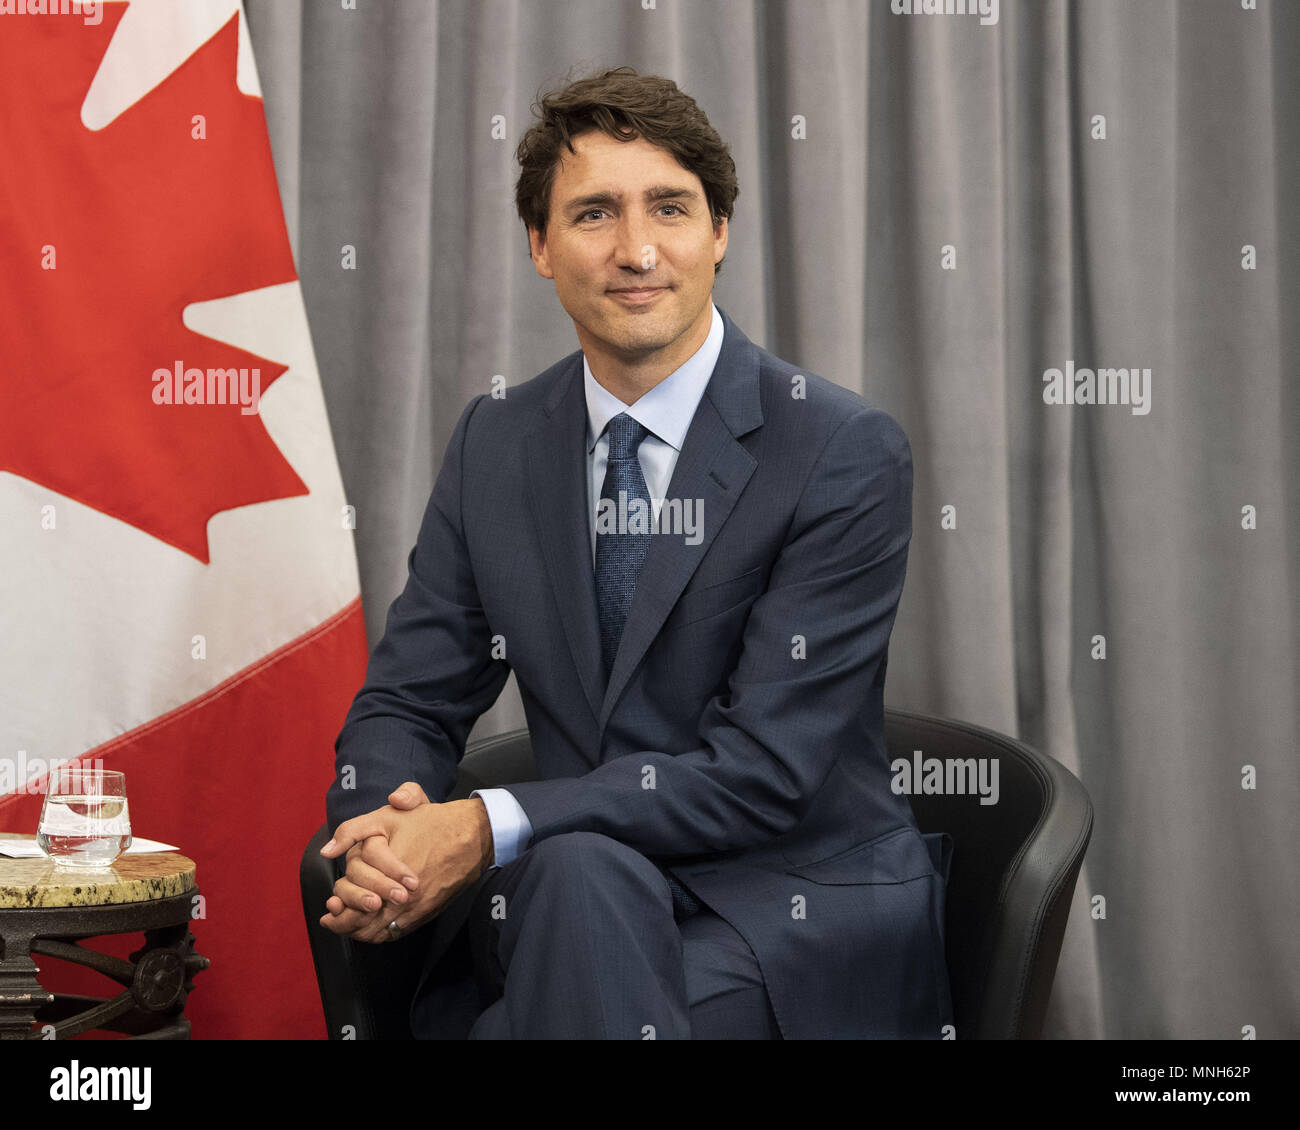 May 16, 2018 - New York, New York, U.S. - JUSTIN TRUDEAU, Prime Minister of Canada, at the Grand Hyatt hotel in New York City. (Credit Image: © Michael Brochstein via ZUMA Wire) Stock Photo